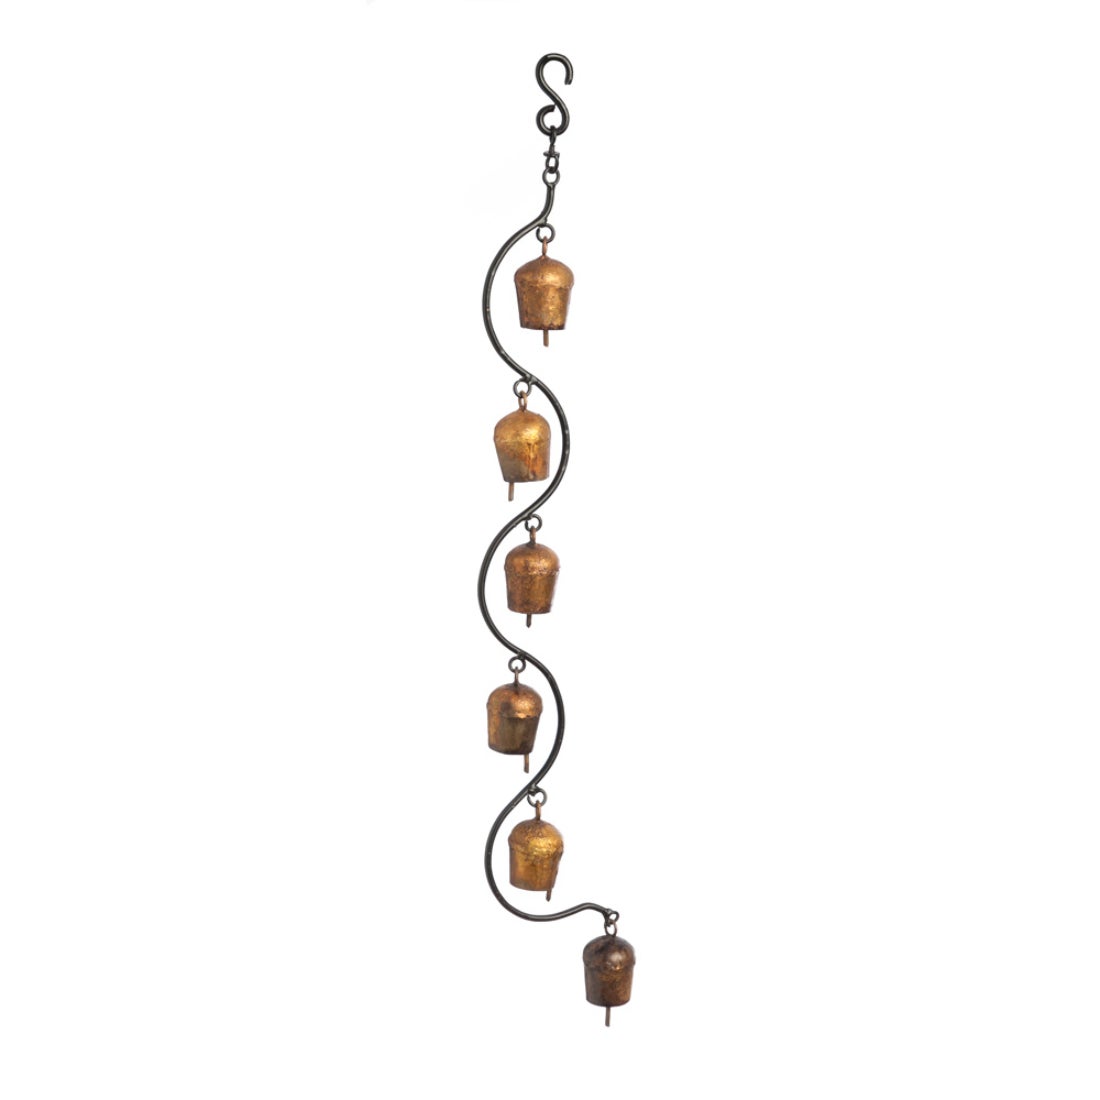 Copper Cast Metal Hanging Bell Chimes